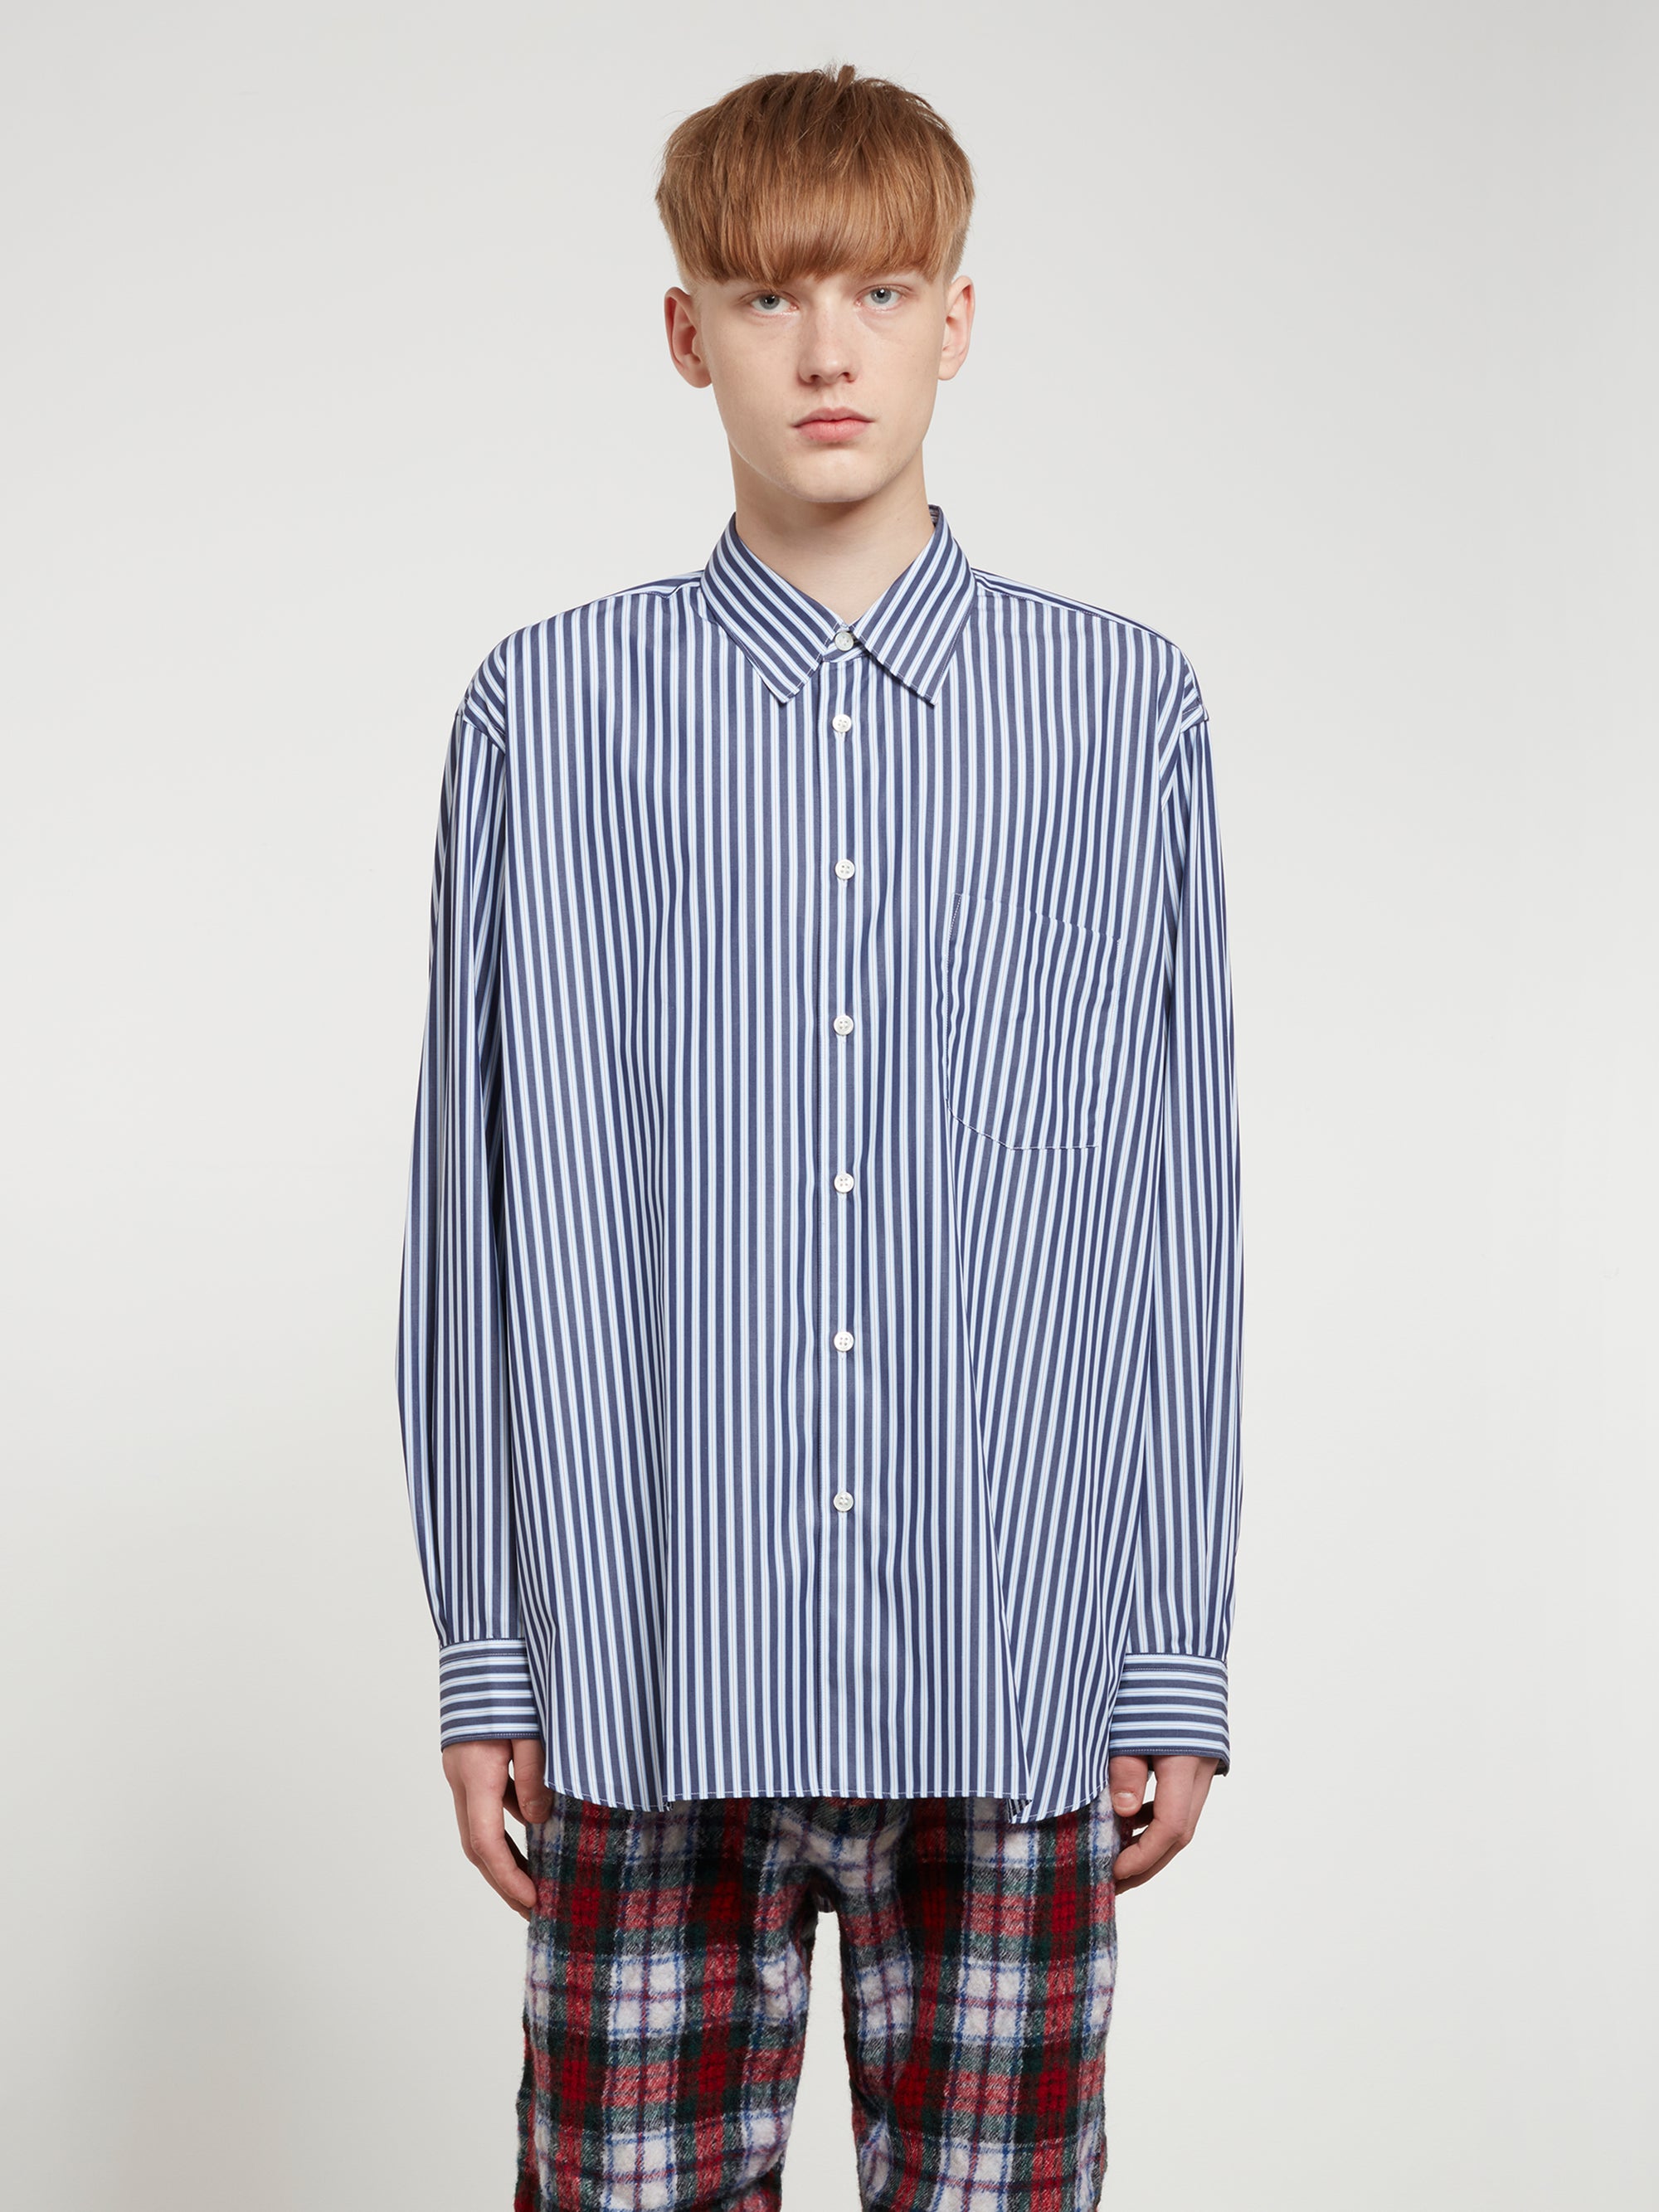 CDG Shirt Forever - Wide Fit Cotton Shirt - (Stripe 3) view 1